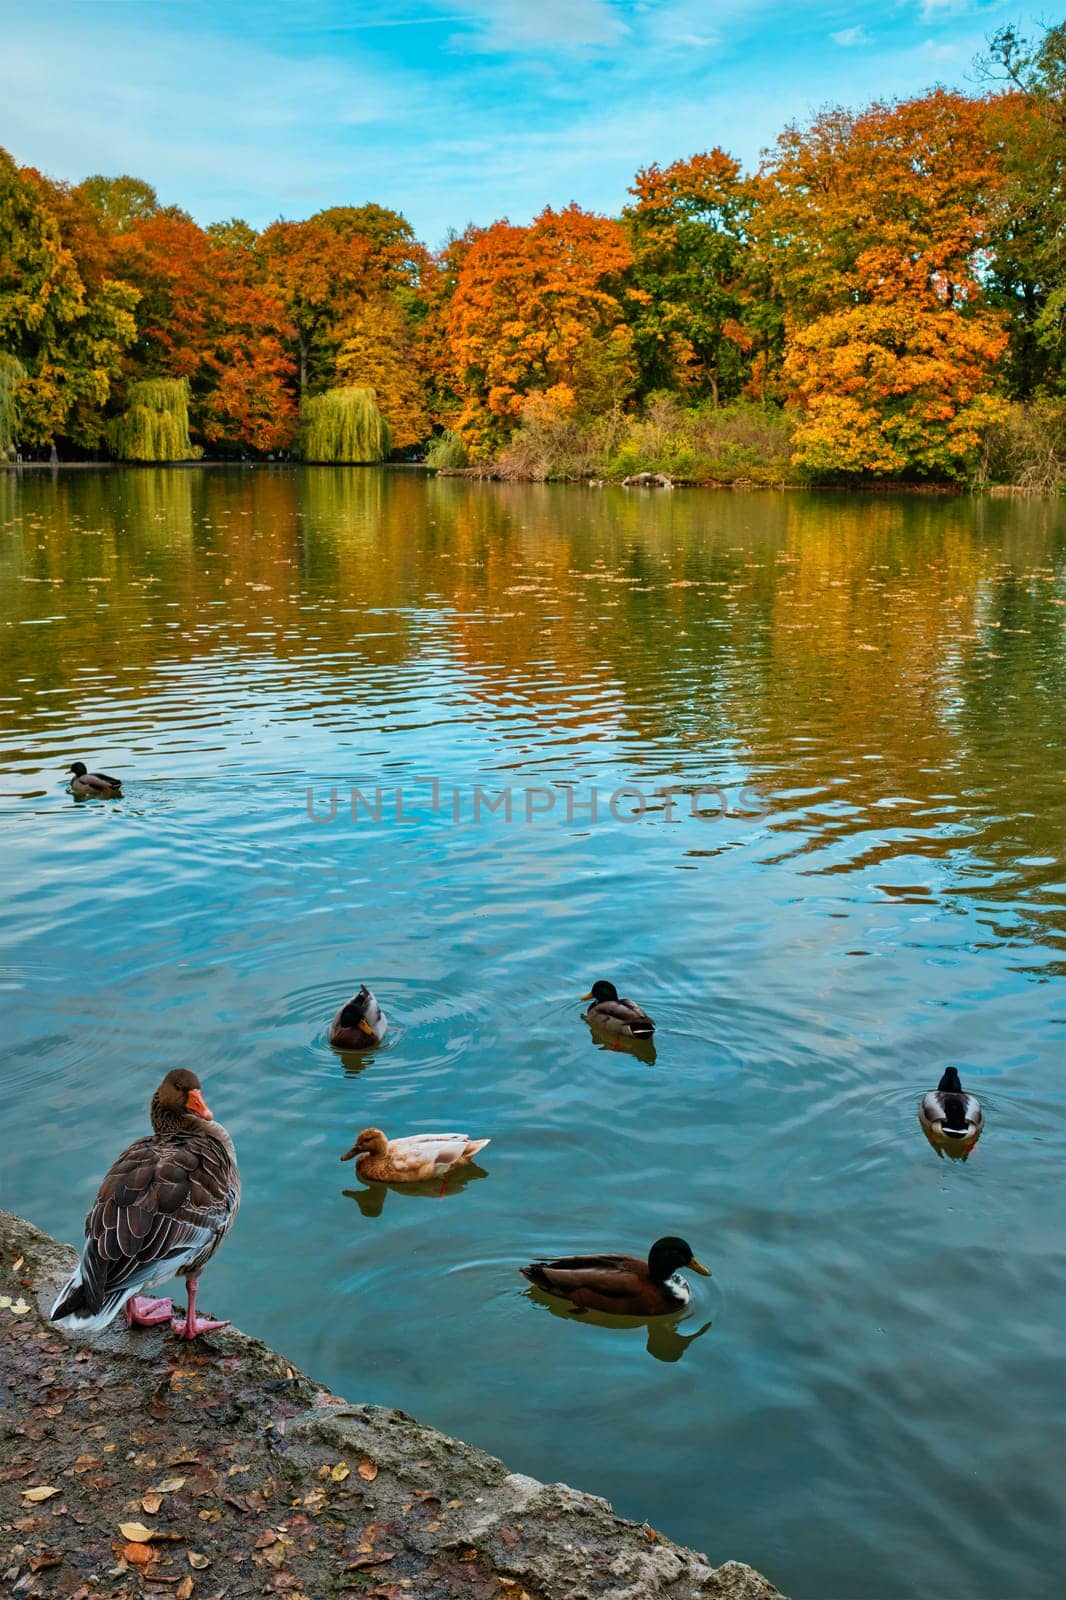 Ducks in a lake in Munich English garden Englischer garten park. Autumn colours on trees and leaves reflecting in water. Munchen, Bavaria, Germany